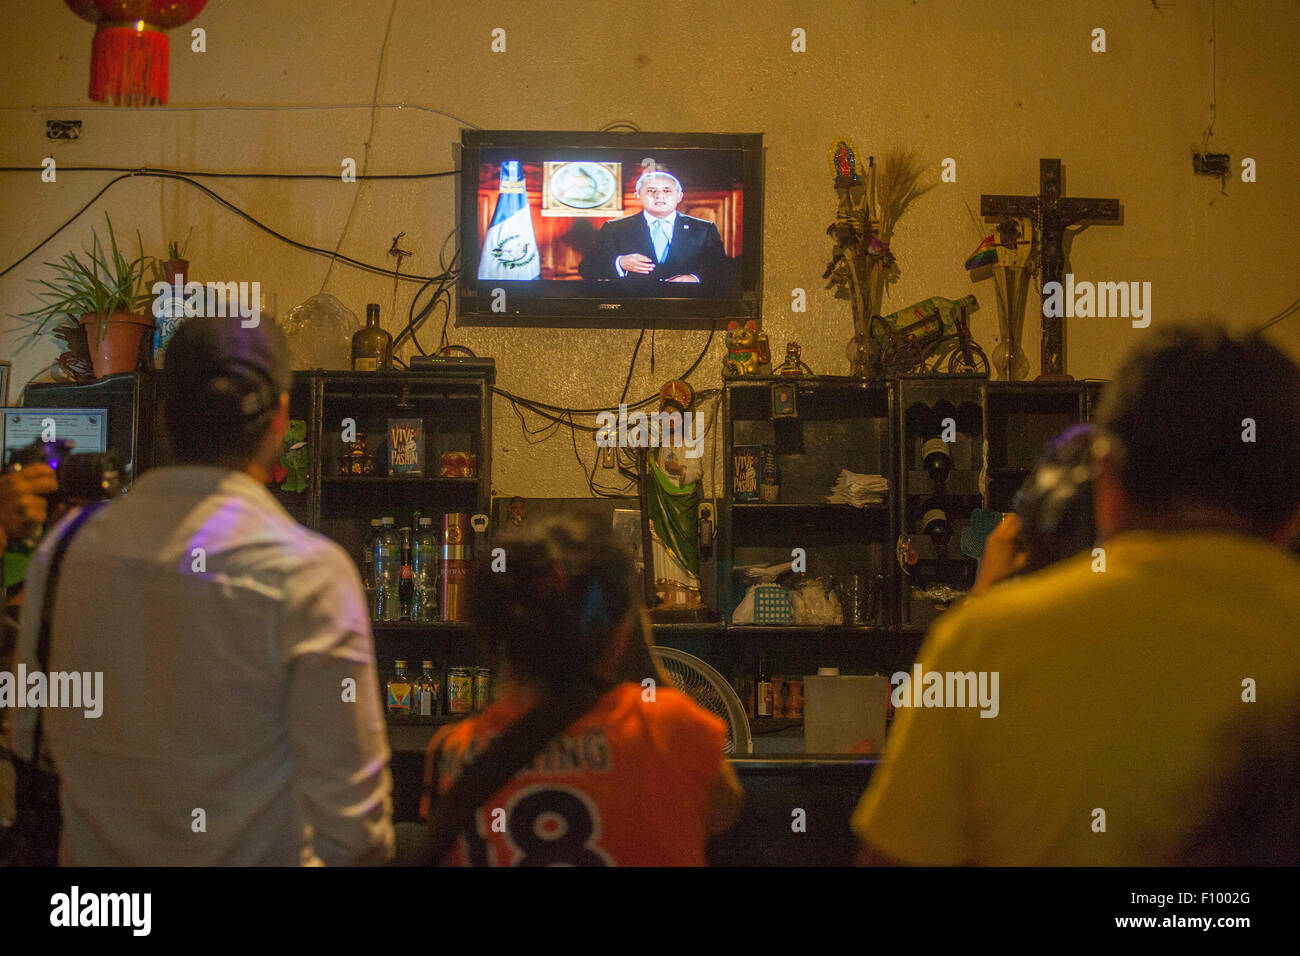 (150824) -- GUATEMALA CITY, Aug. 24, 2015 (Xinhua) -- People watch TV as Guatemala's President Otto Perez Molina delivering a speech, in Guatemala City, capital of Guatemala, on Aug. 23, 2015. President Otto Perez Molina says he won't resign from office despite investigators saying he may have been involved in a customs fraud scandal that has thrown the country into political crisis. (Xinhua/Luis Echeverria) Stock Photo